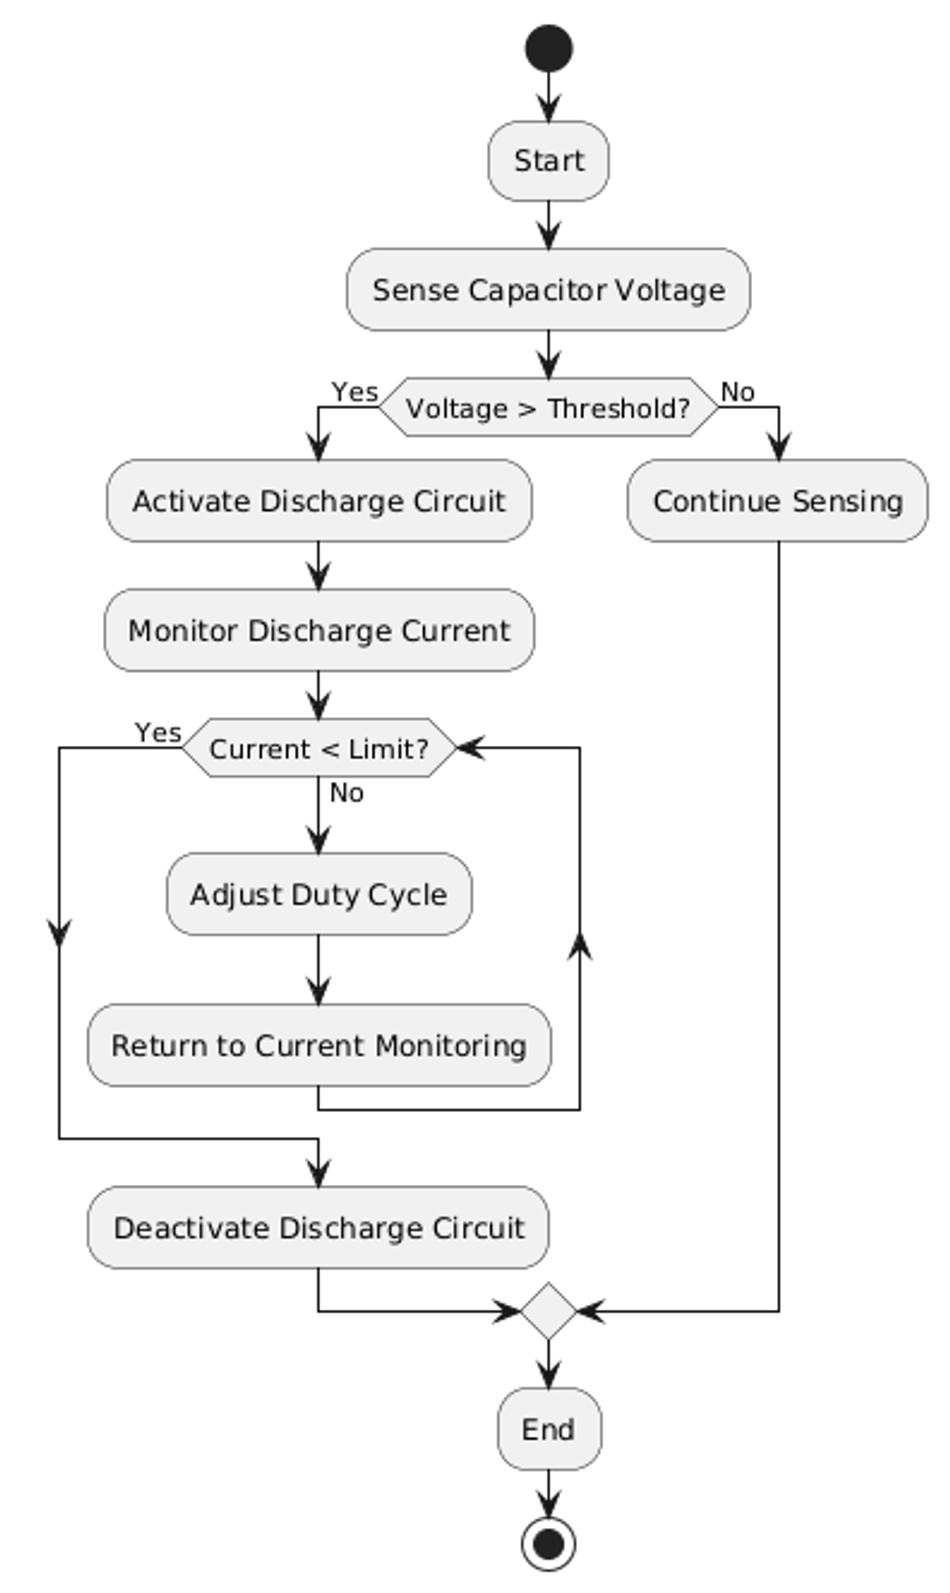 The flowchart begins with a "Start" action. The next step is to "Sense Capacitor Voltage." If the sensed voltage is greater than the threshold, the process moves to "Activate Discharge Circuit" and then "Monitor Discharge Current."  While the discharge current is not below the limit, the process involves "Adjust Duty Cycle" and returning to "Current Monitoring." Once the current is below the limit, the process will "Deactivate Discharge Circuit."  If the voltage is not above the threshold, the process will "Continue Sensing." Finally, the flowchart ends with an "End" action.